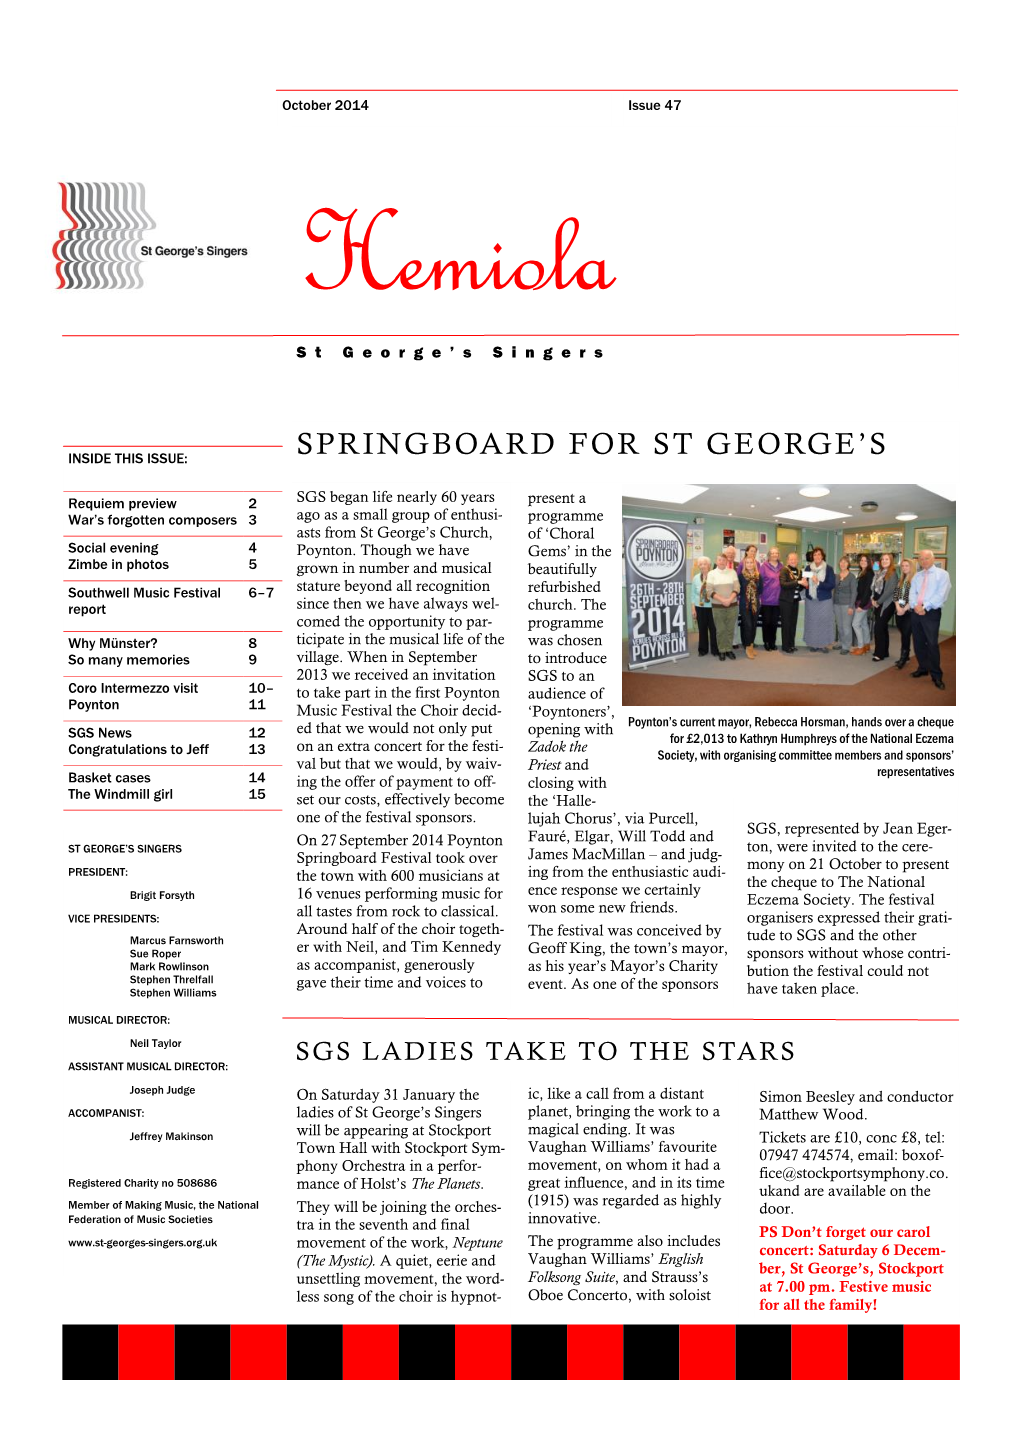 Springboard for St George's